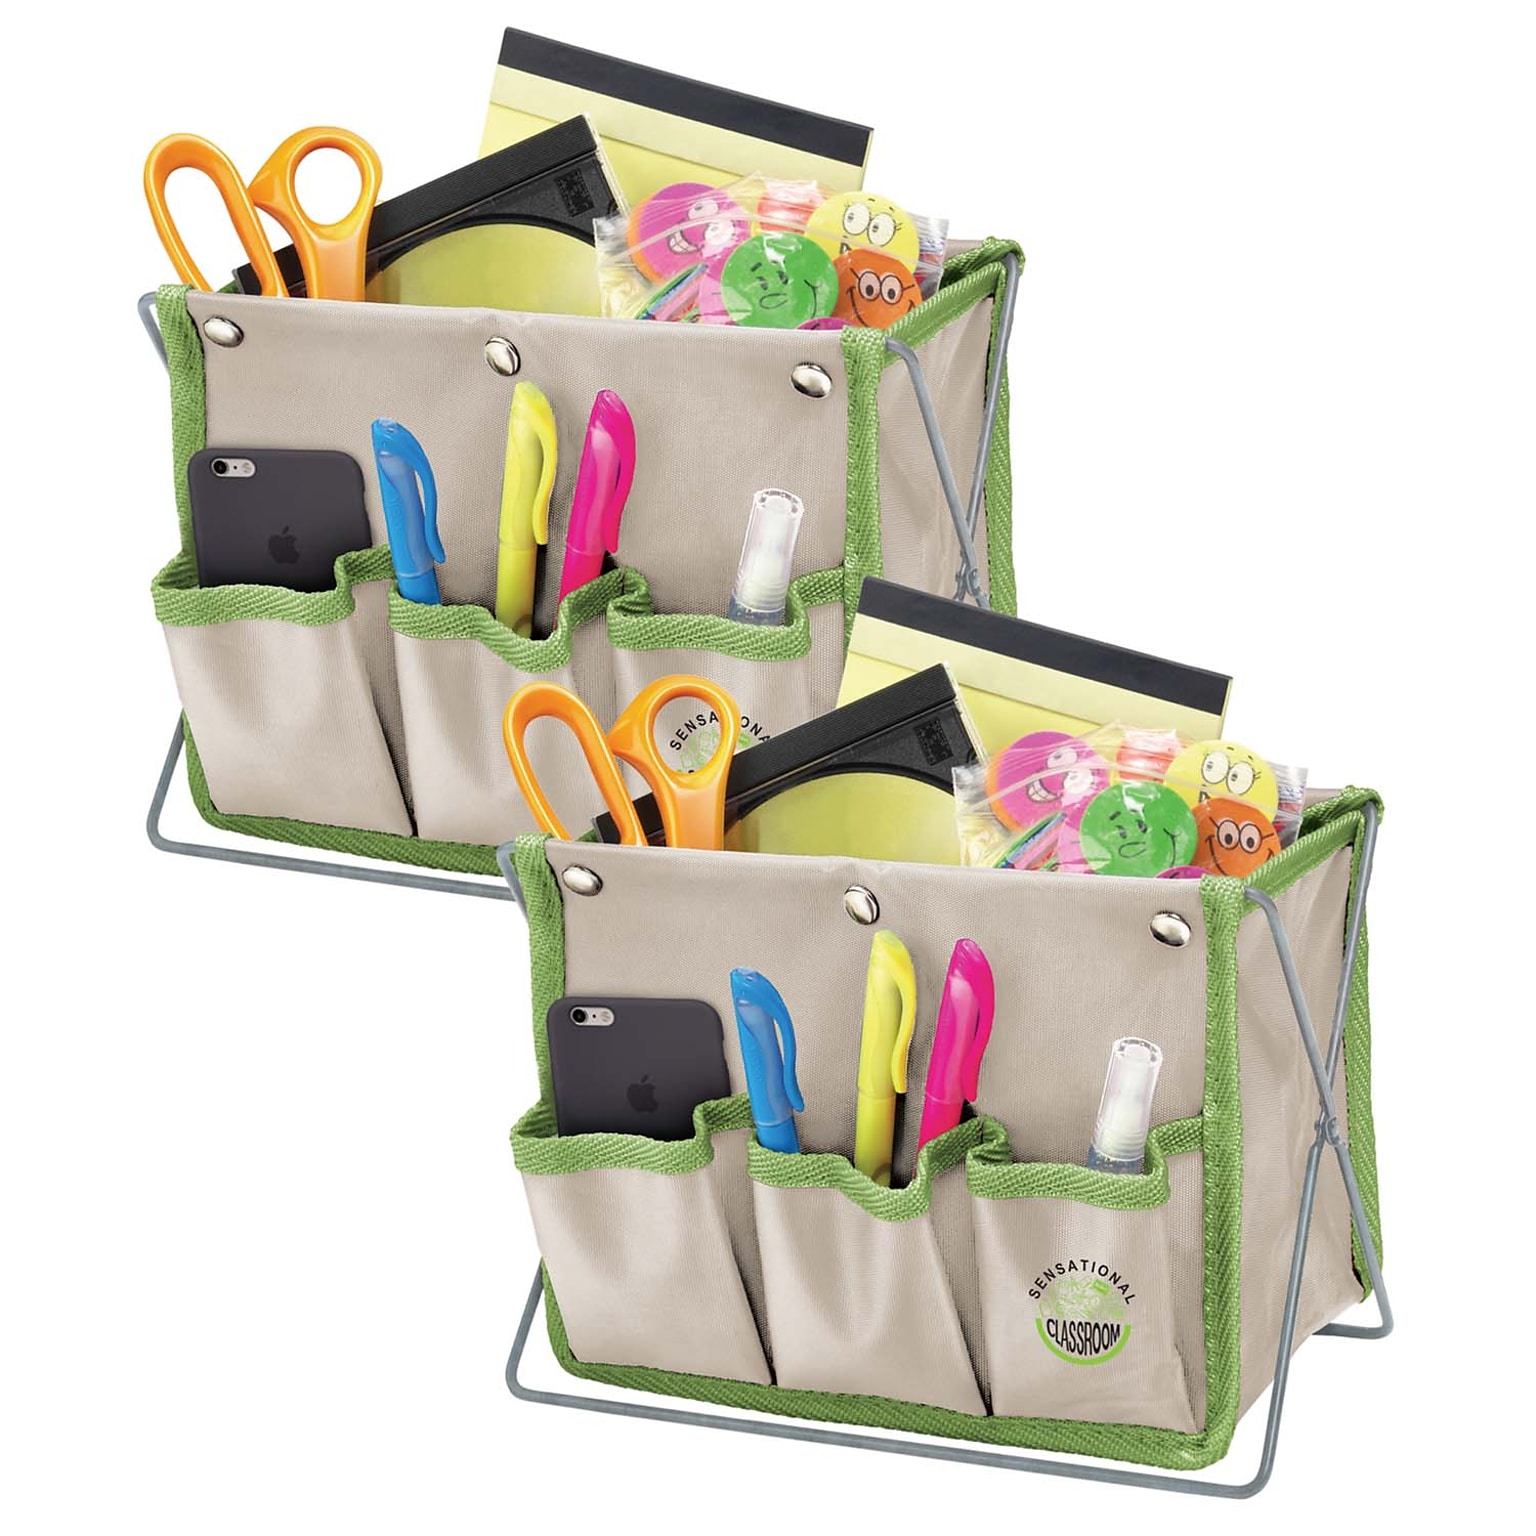 Primary Concepts Sensational Classroom Polyester/Metal Accessory Holders, Tan/Green, 2/Bundle (ELP626688-2)